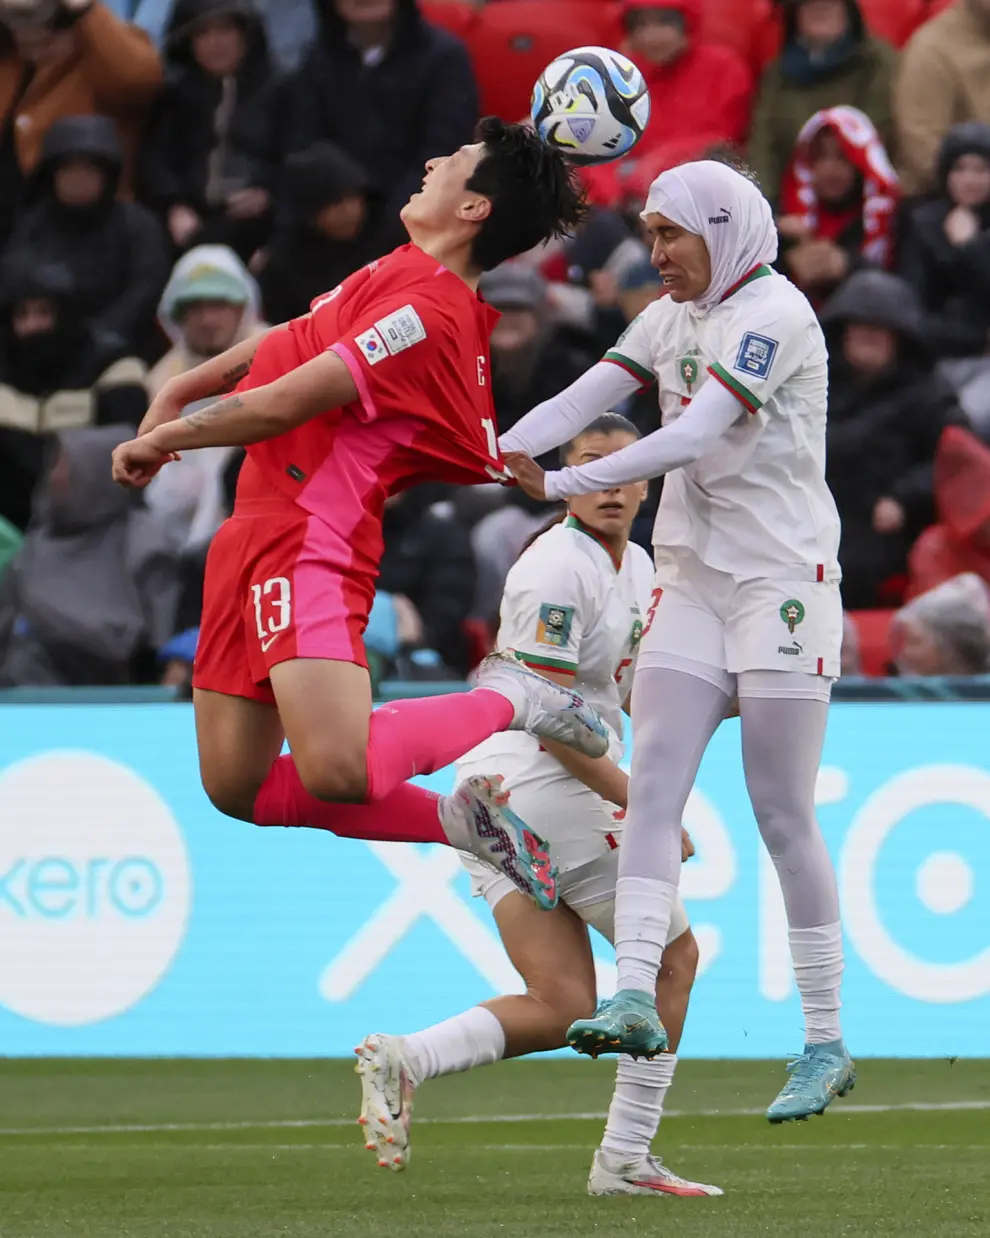 South Korea's Park Eun-sun, left, and Morocco's Nouhaila Benzina compete for the ballduring the Women's World Cup Group H soccer match between South Korea and Morocco in Adelaide, Australia, Sunday, July 30, 2023. (AP Photo/James Elsby)